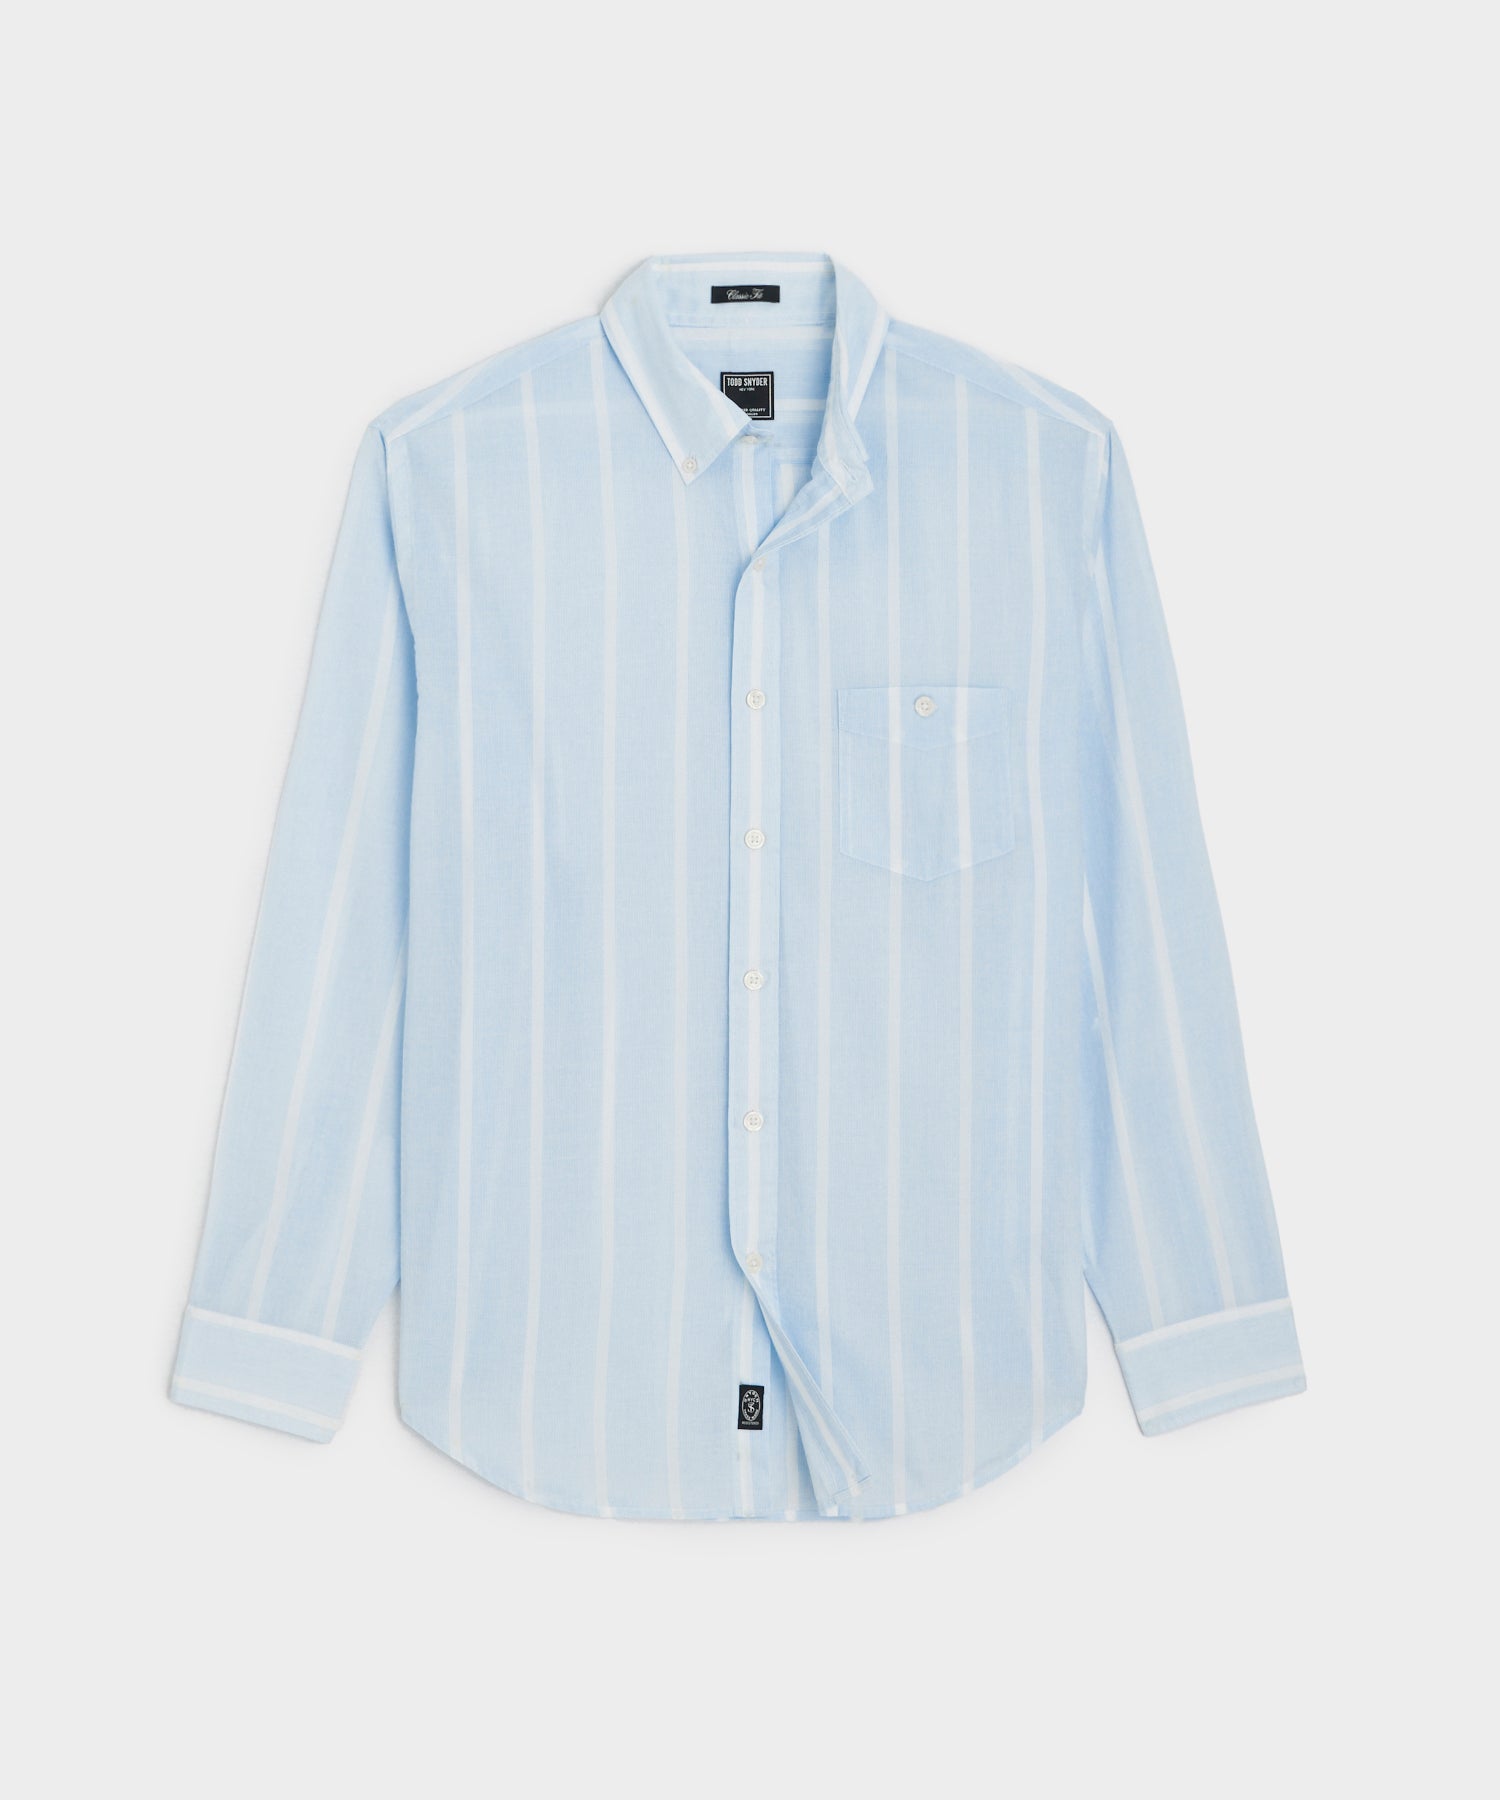 CLASSIC FIT SUMMERWEIGHT FAVORITE SHIRT IN SKY AWNING STRIPE